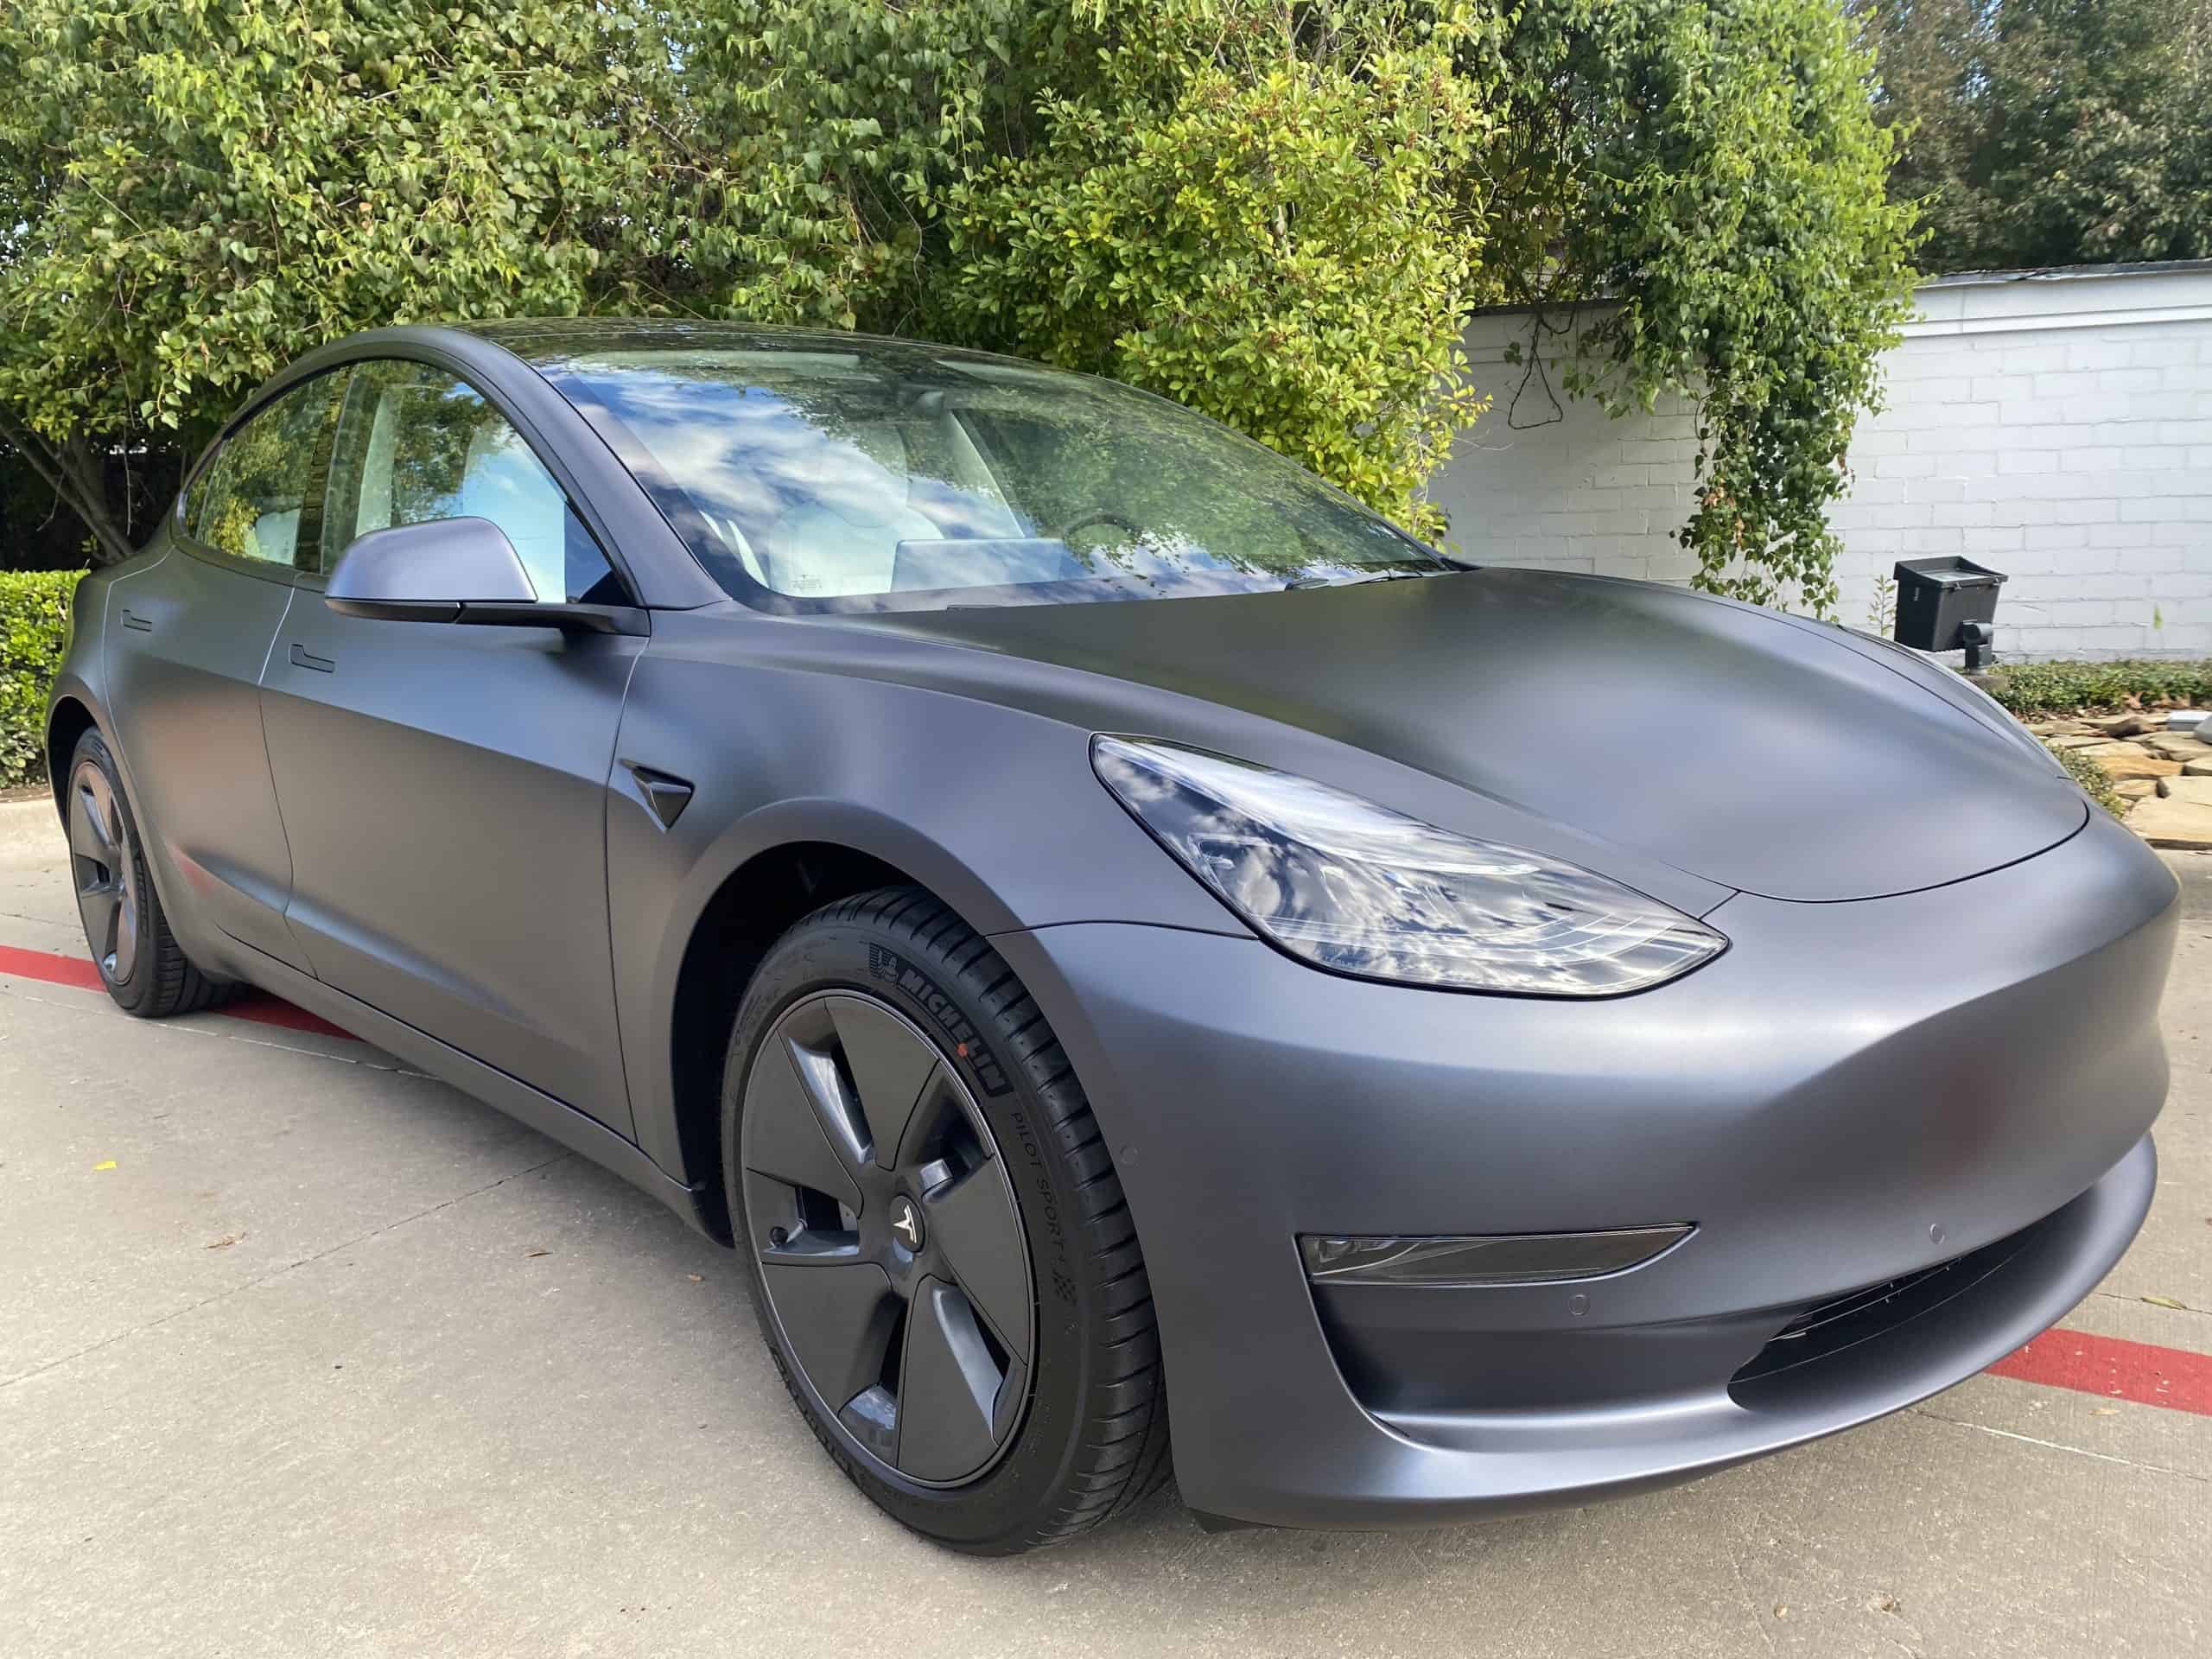 How Much Does It Cost to Protect Your Tesla Model Y with Paint